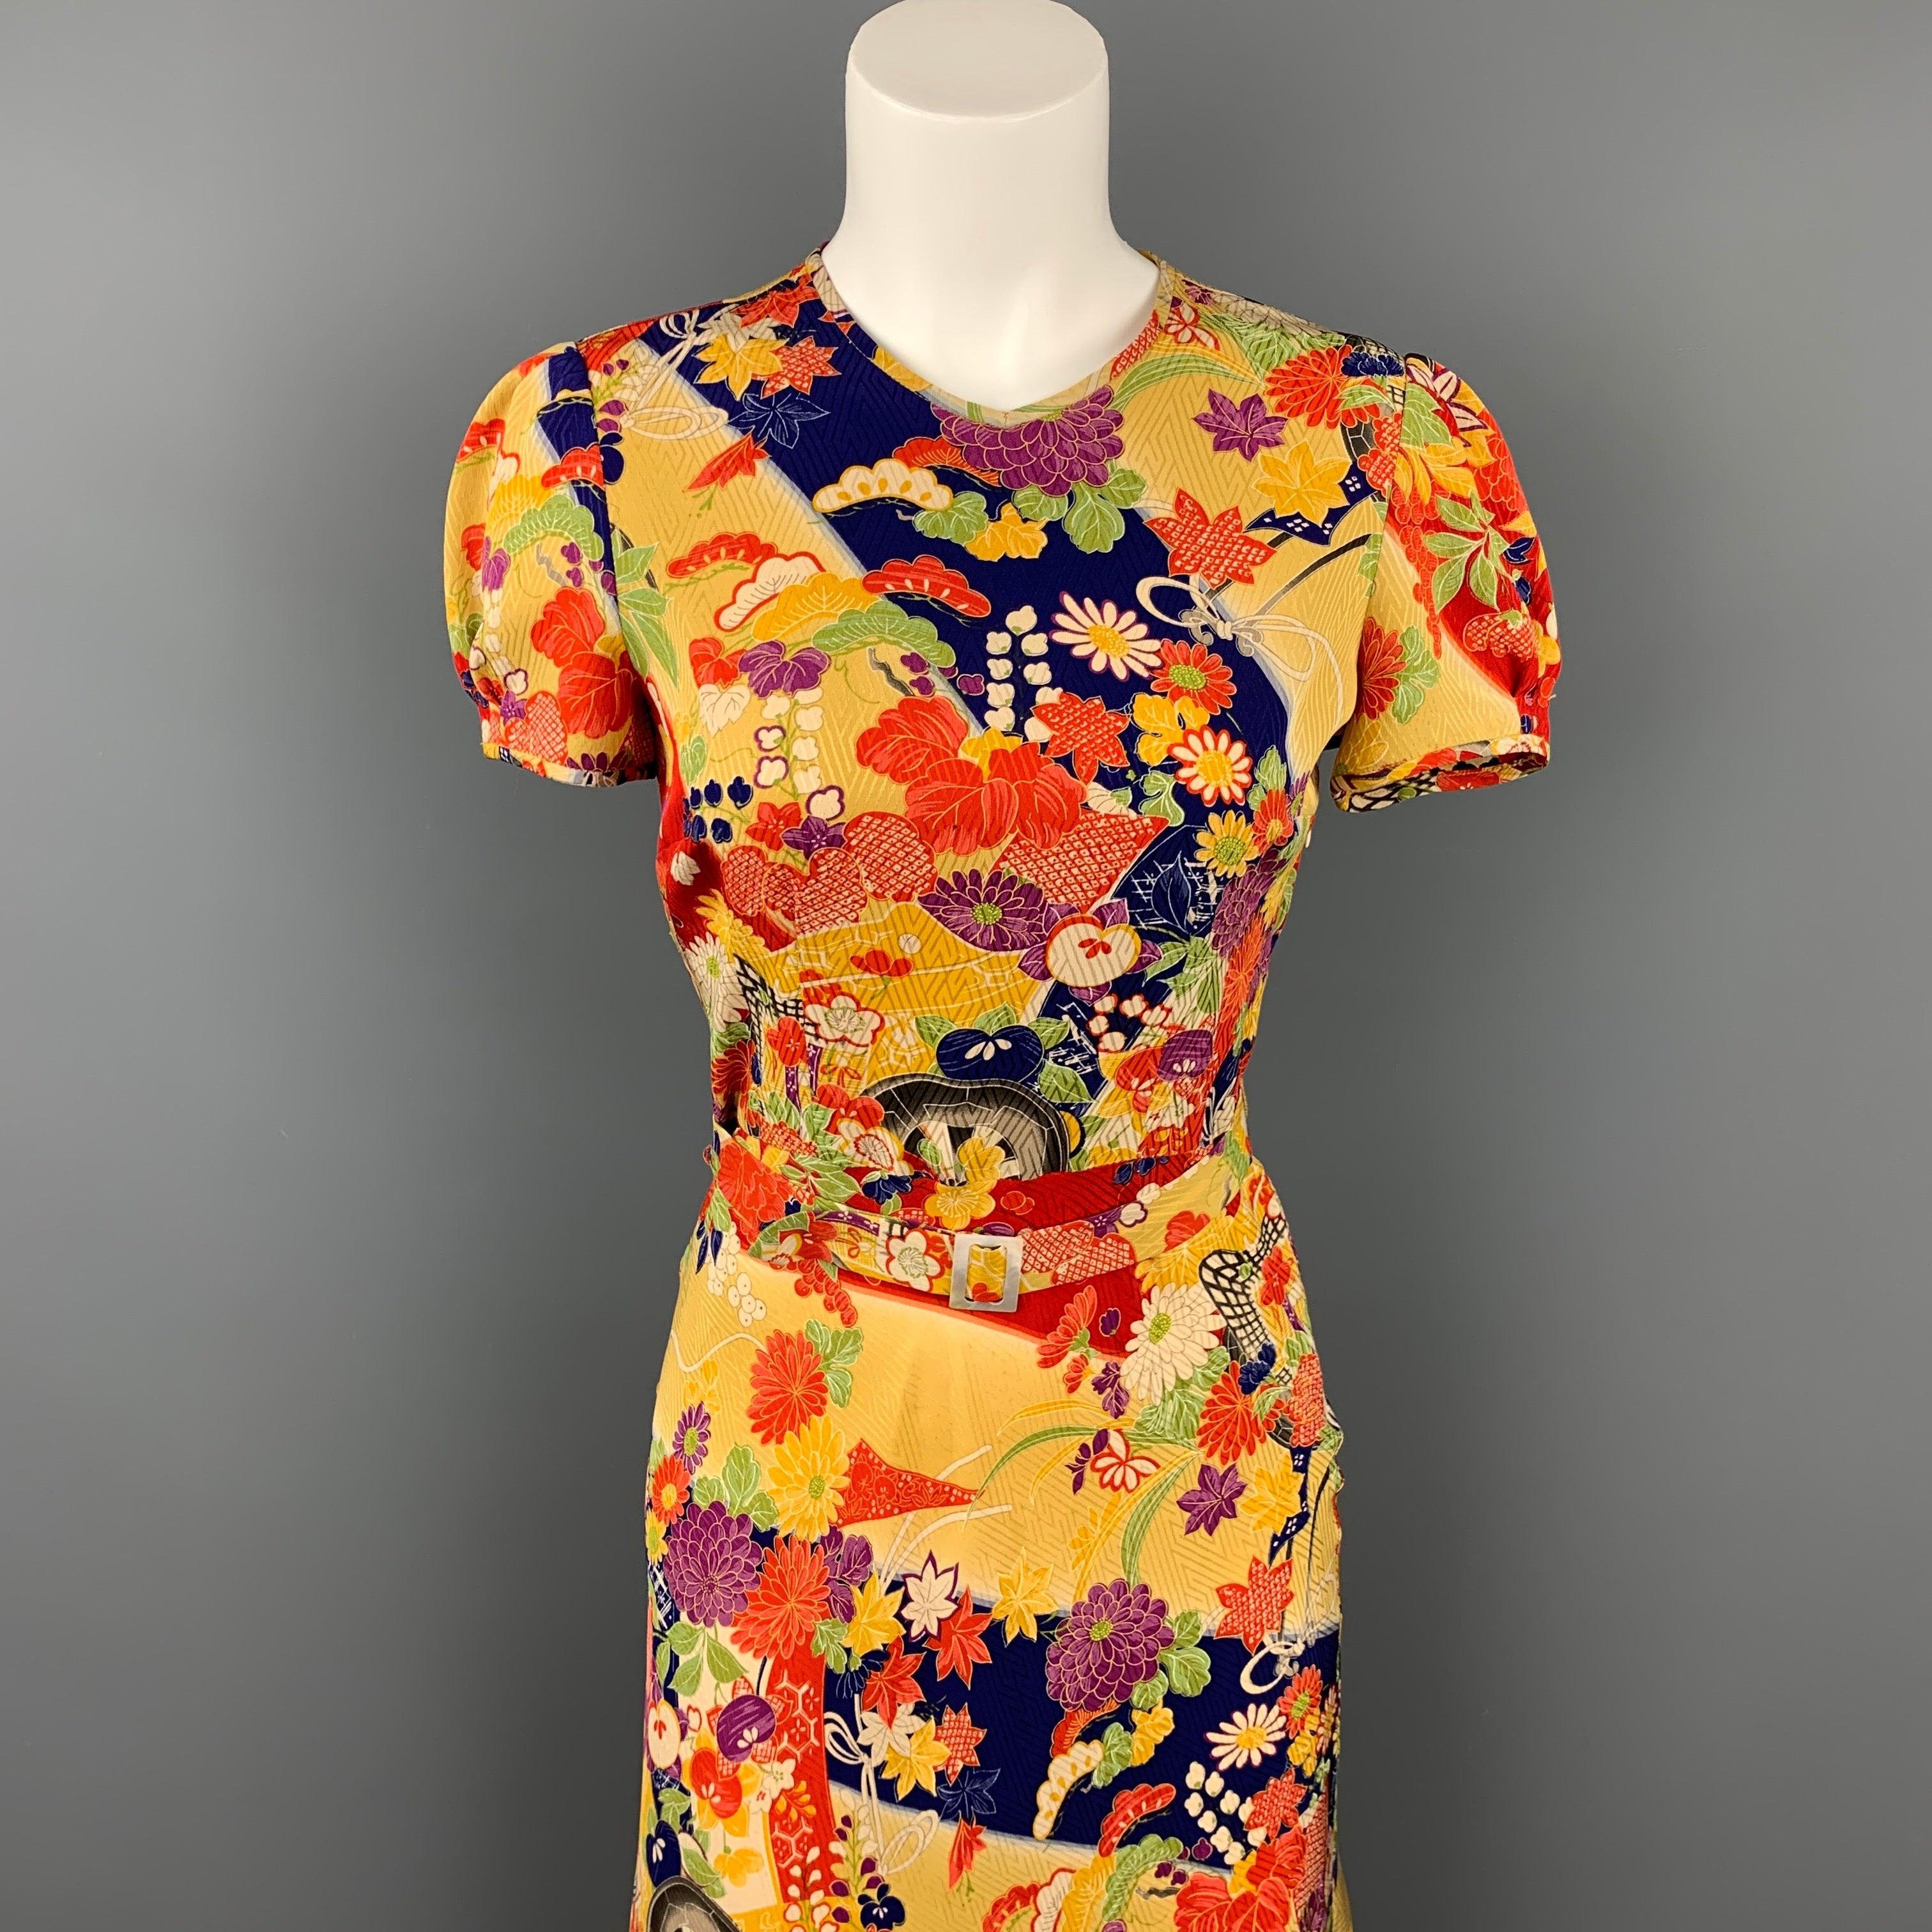 RALPH LAUREN Collection dress comes in a multi-color floral silk featuring a belted style, a-line, and a back button closure. Made in USA.
Very Good Pre-Owned Condition. 

Marked:   2 

Measurements: 
 
Shoulder: 14 inches  Bust: 34 inches  Waist: